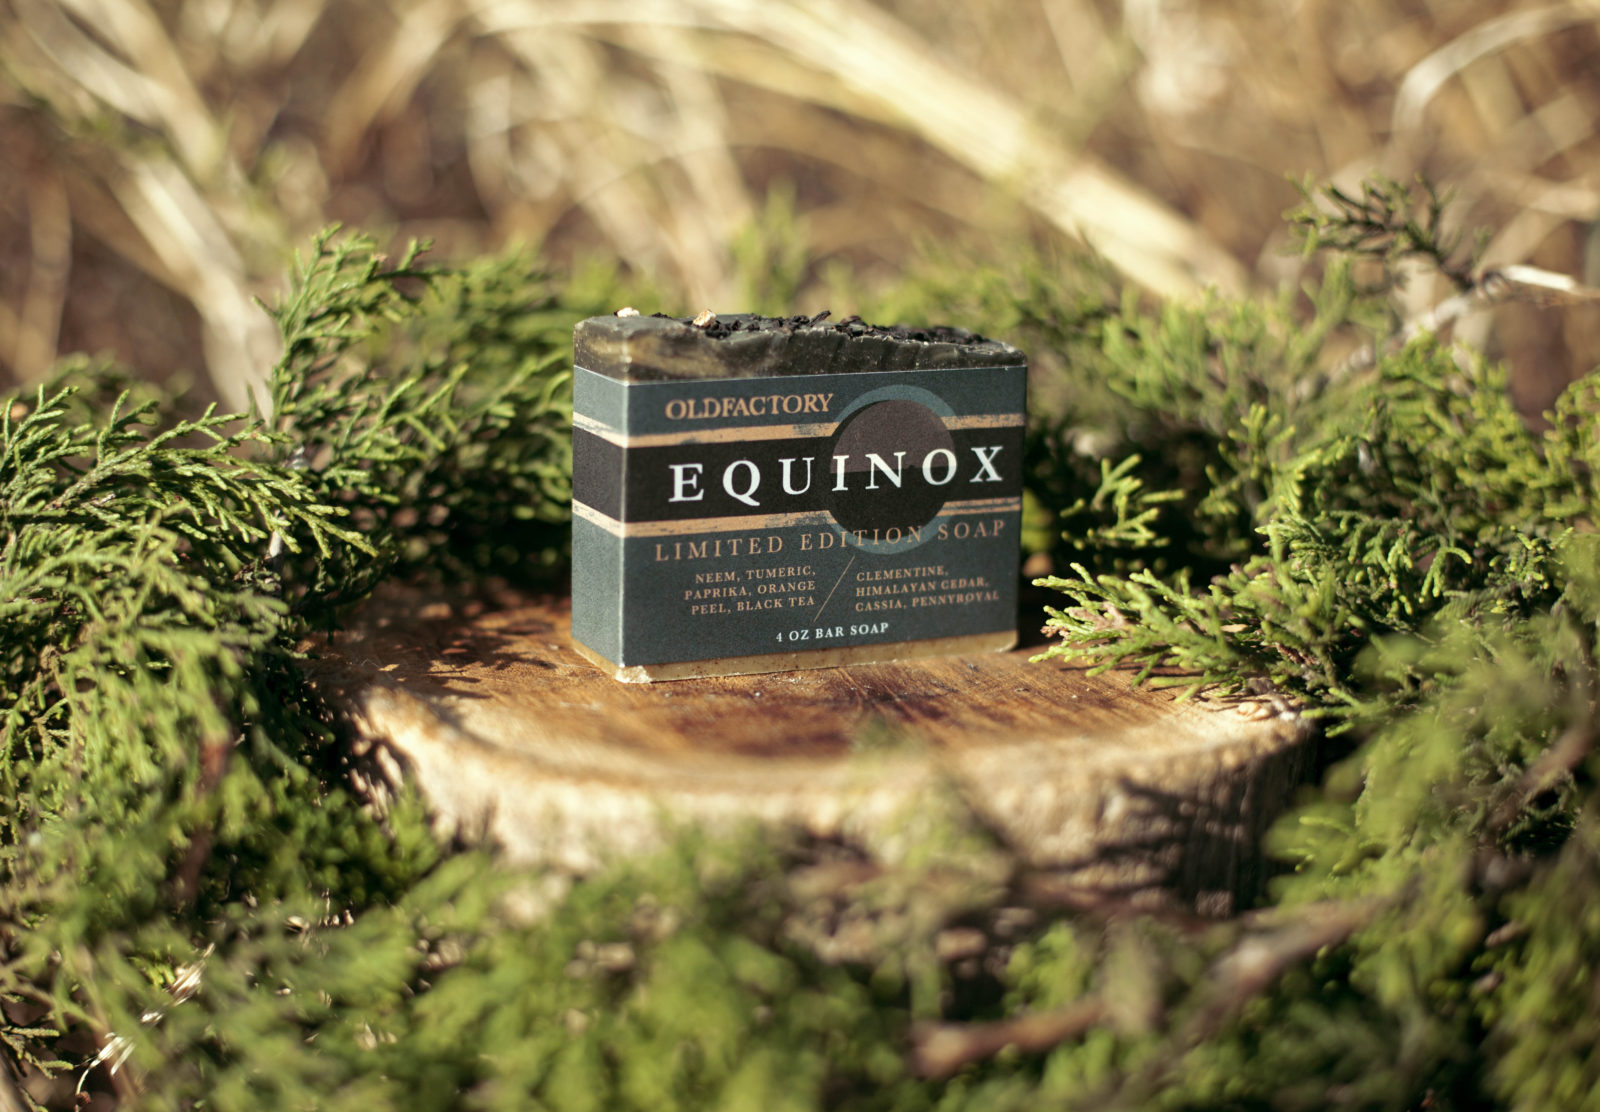 Equinox Limited Edition Soap Label Old Factory Soap